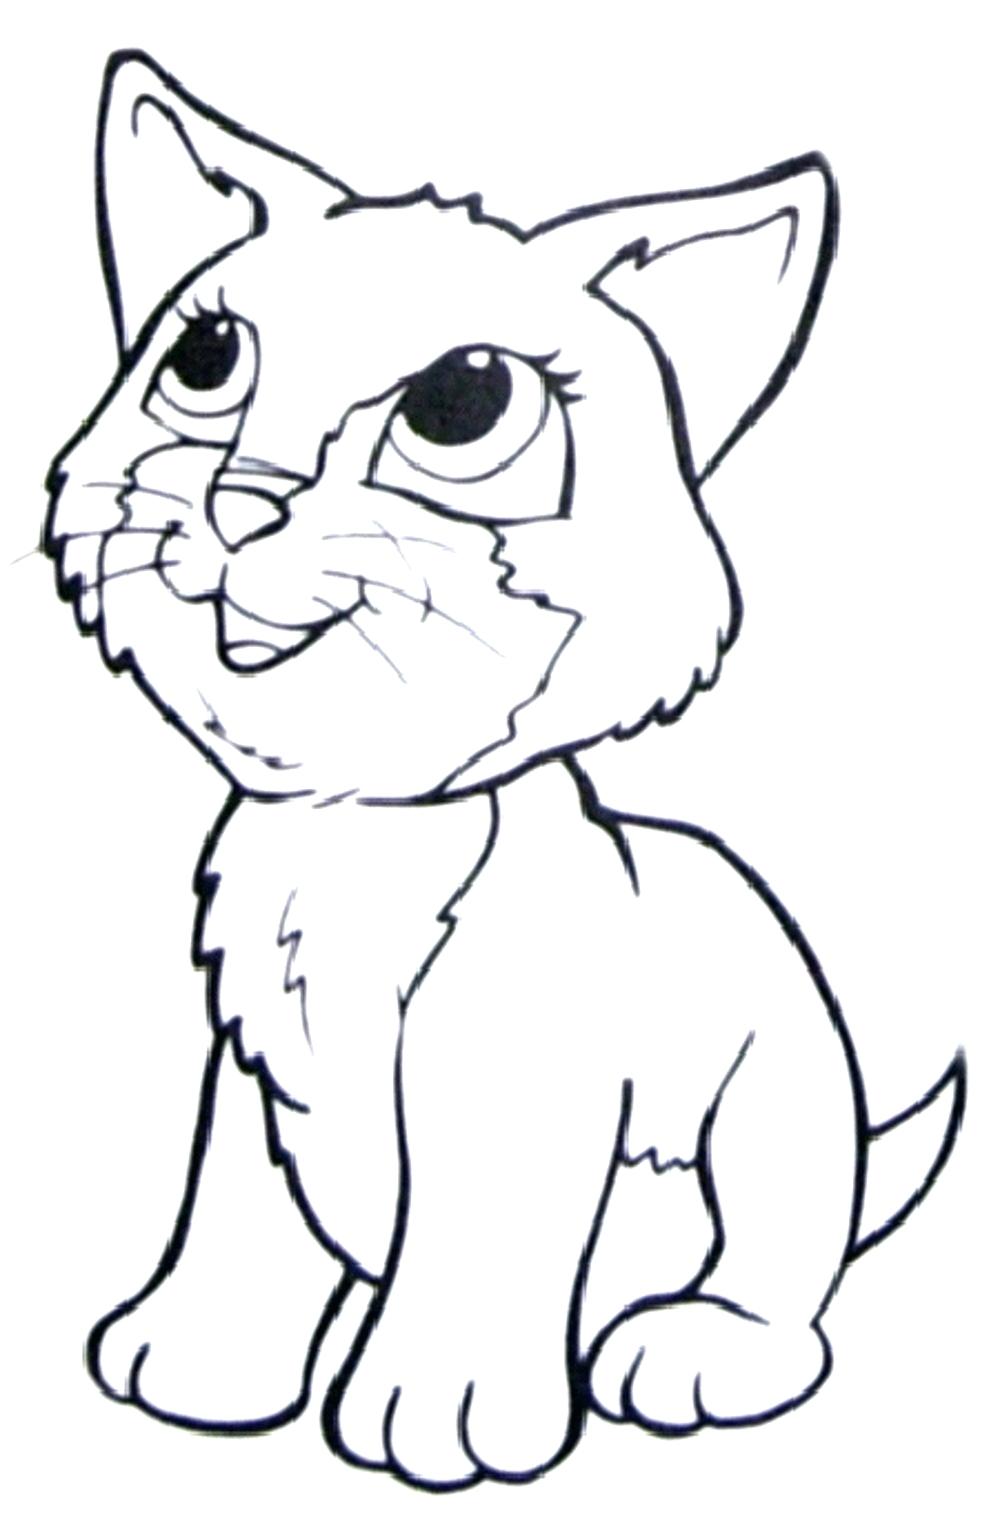 Coloring Pages : Coloring Pages Cute Cats Spineprint Co ...